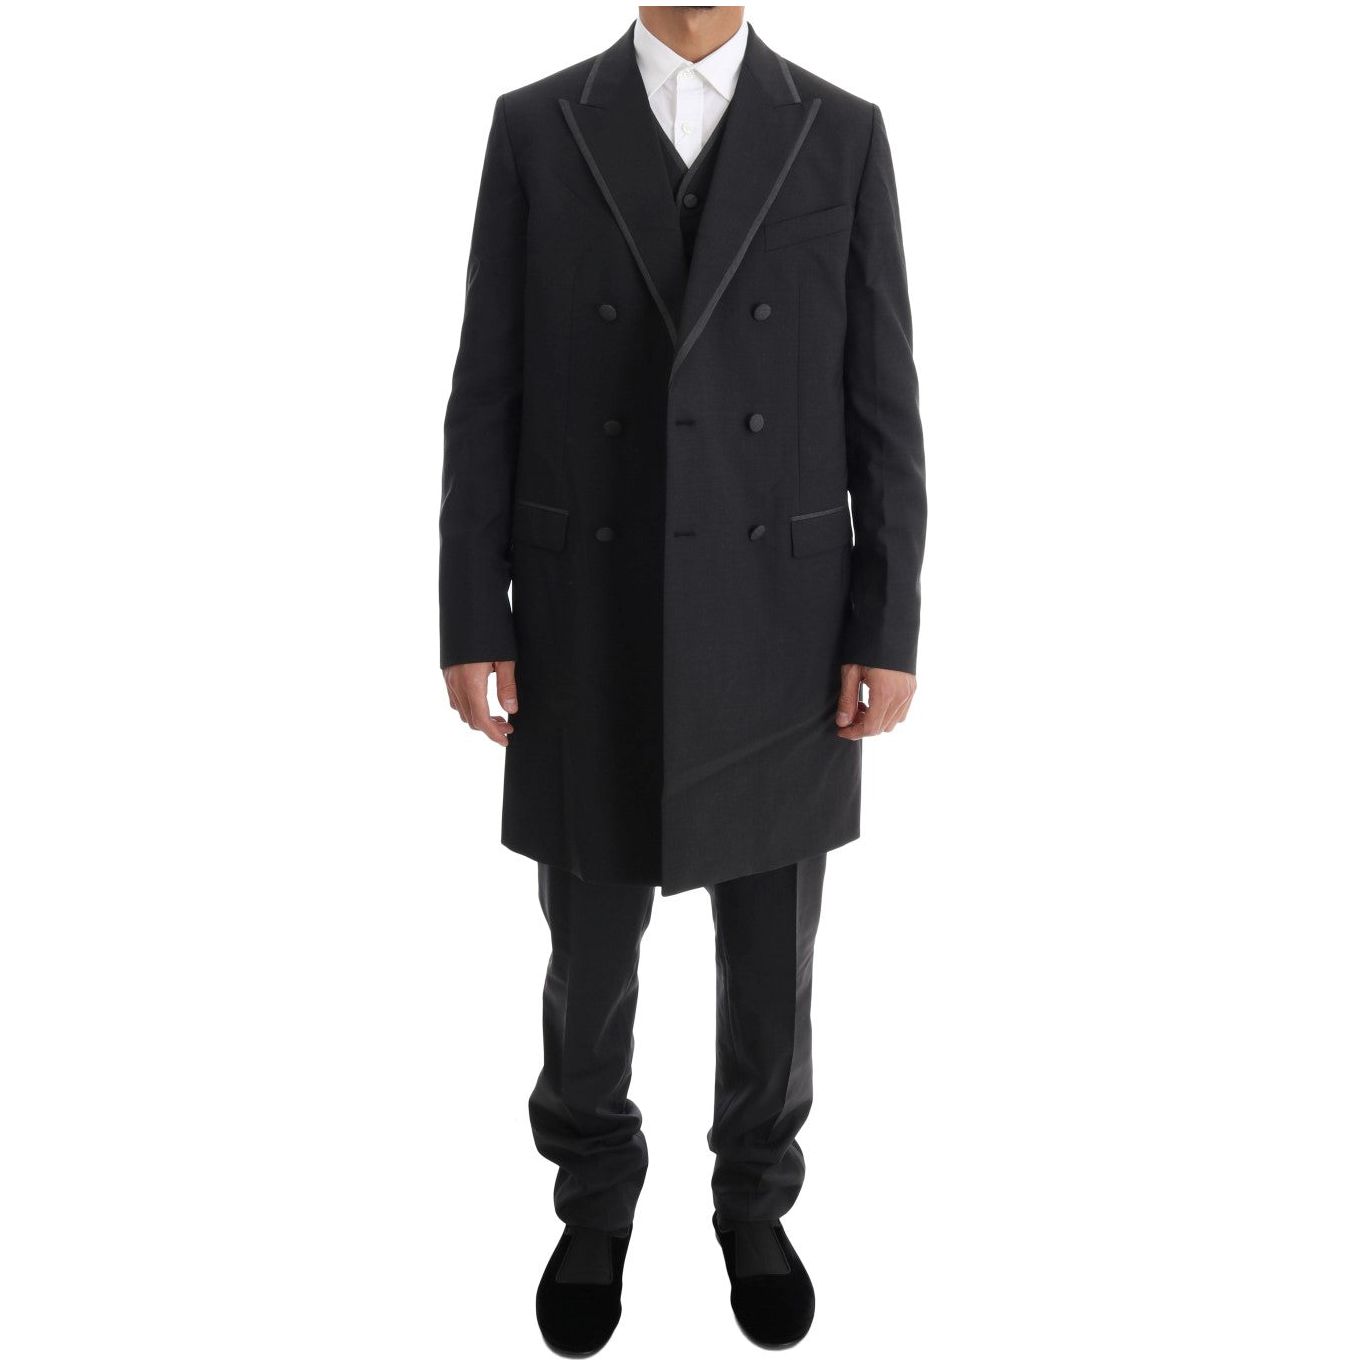 Dolce & Gabbana Elegant Gray Double Breasted Wool Suit gray-wool-stretch-3-piece-two-button-suit-1 Suit